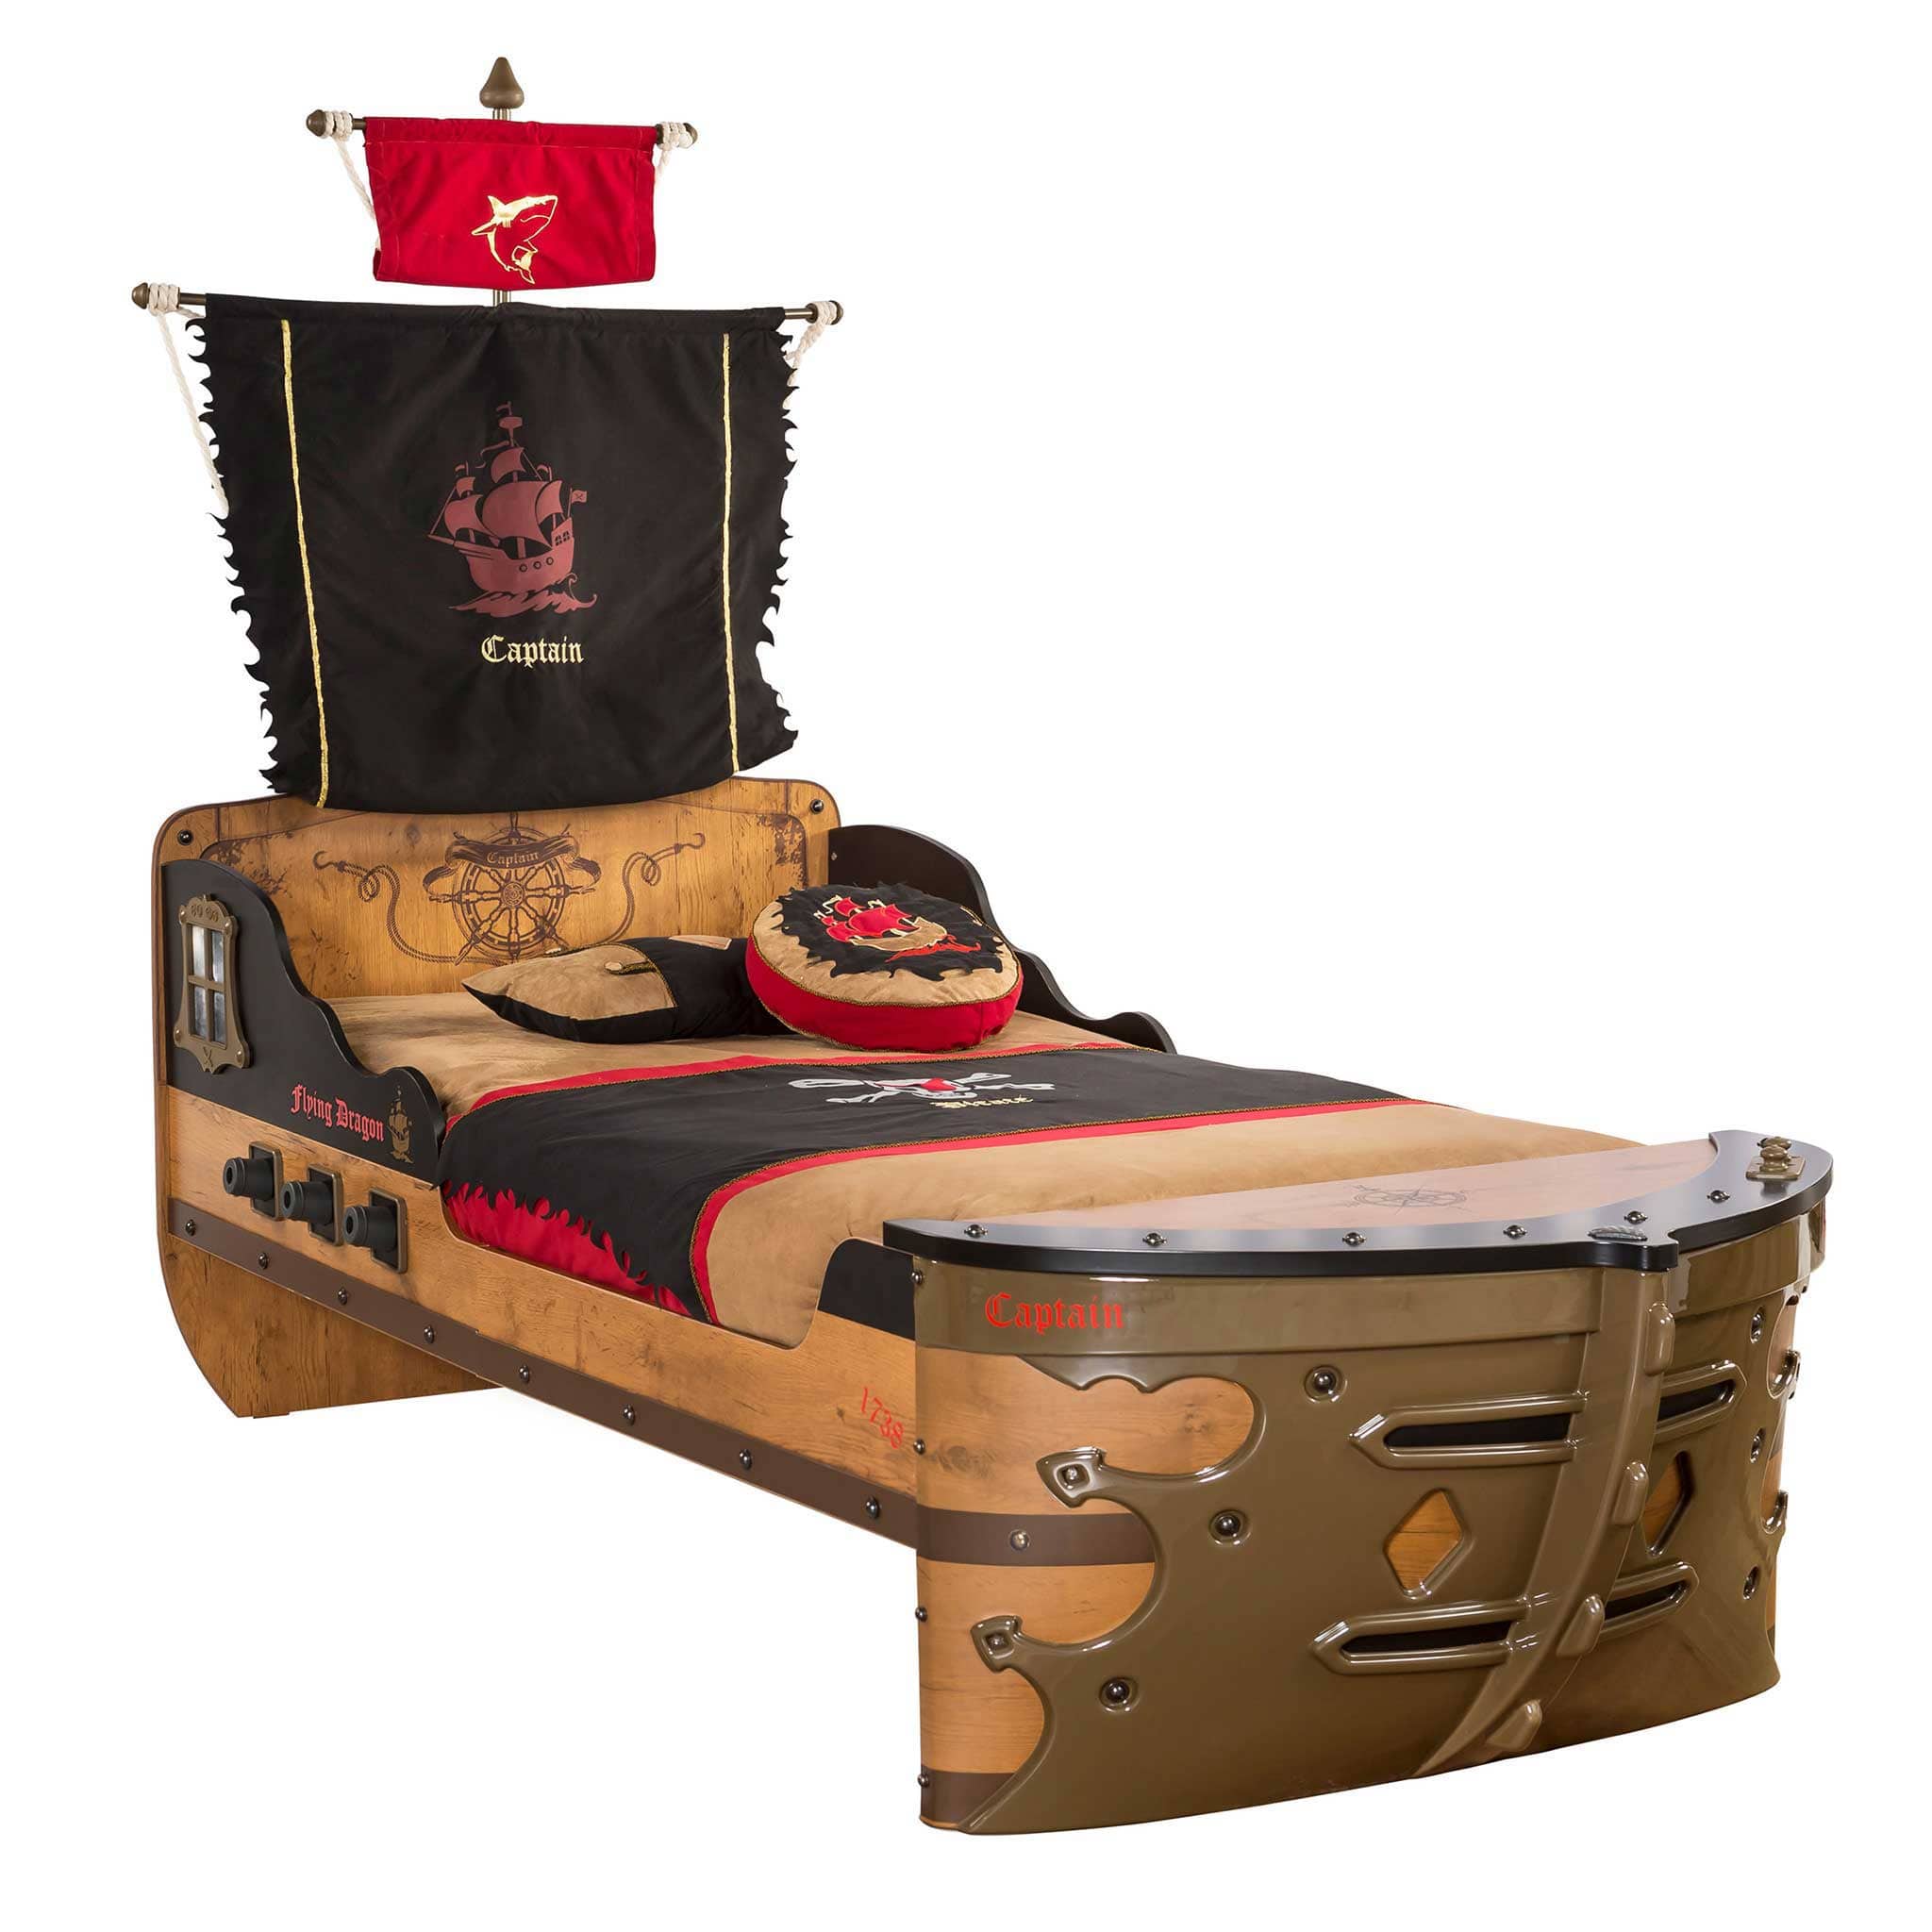 Pirate Twin-Size Captain Ship Bed with Sails and Deck and Trundle Storage Bed